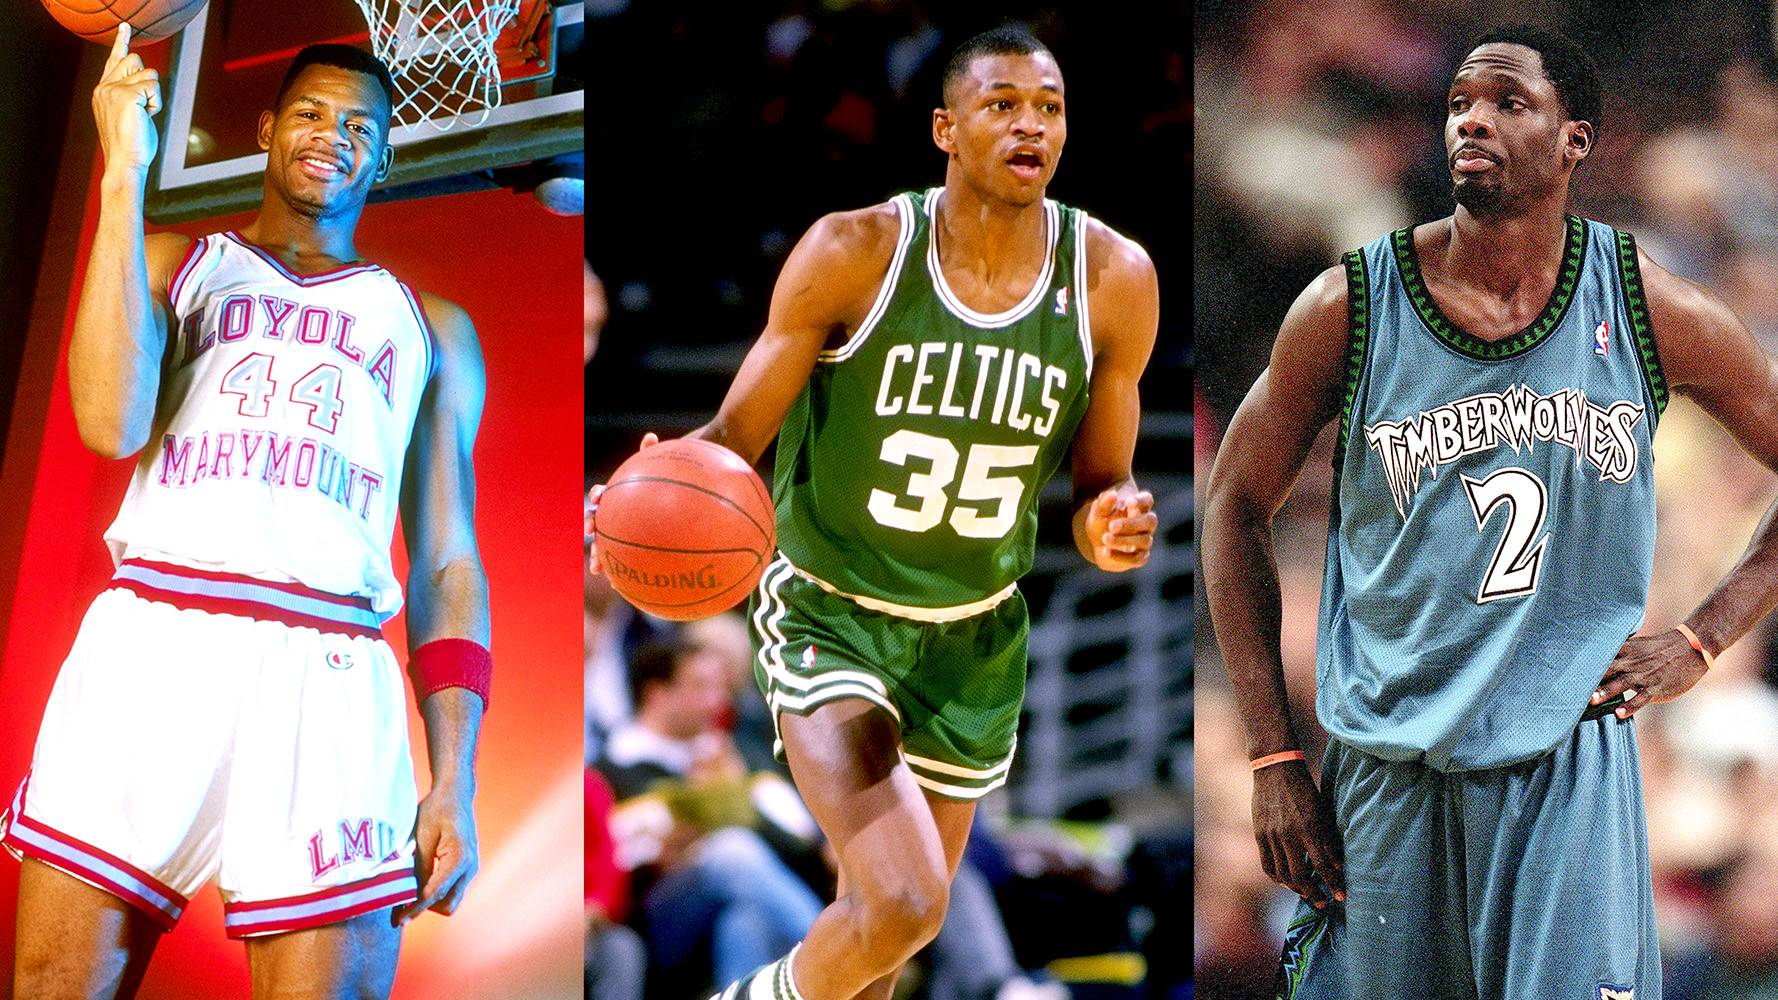 Every player in Boston Celtics history who wore No. 44